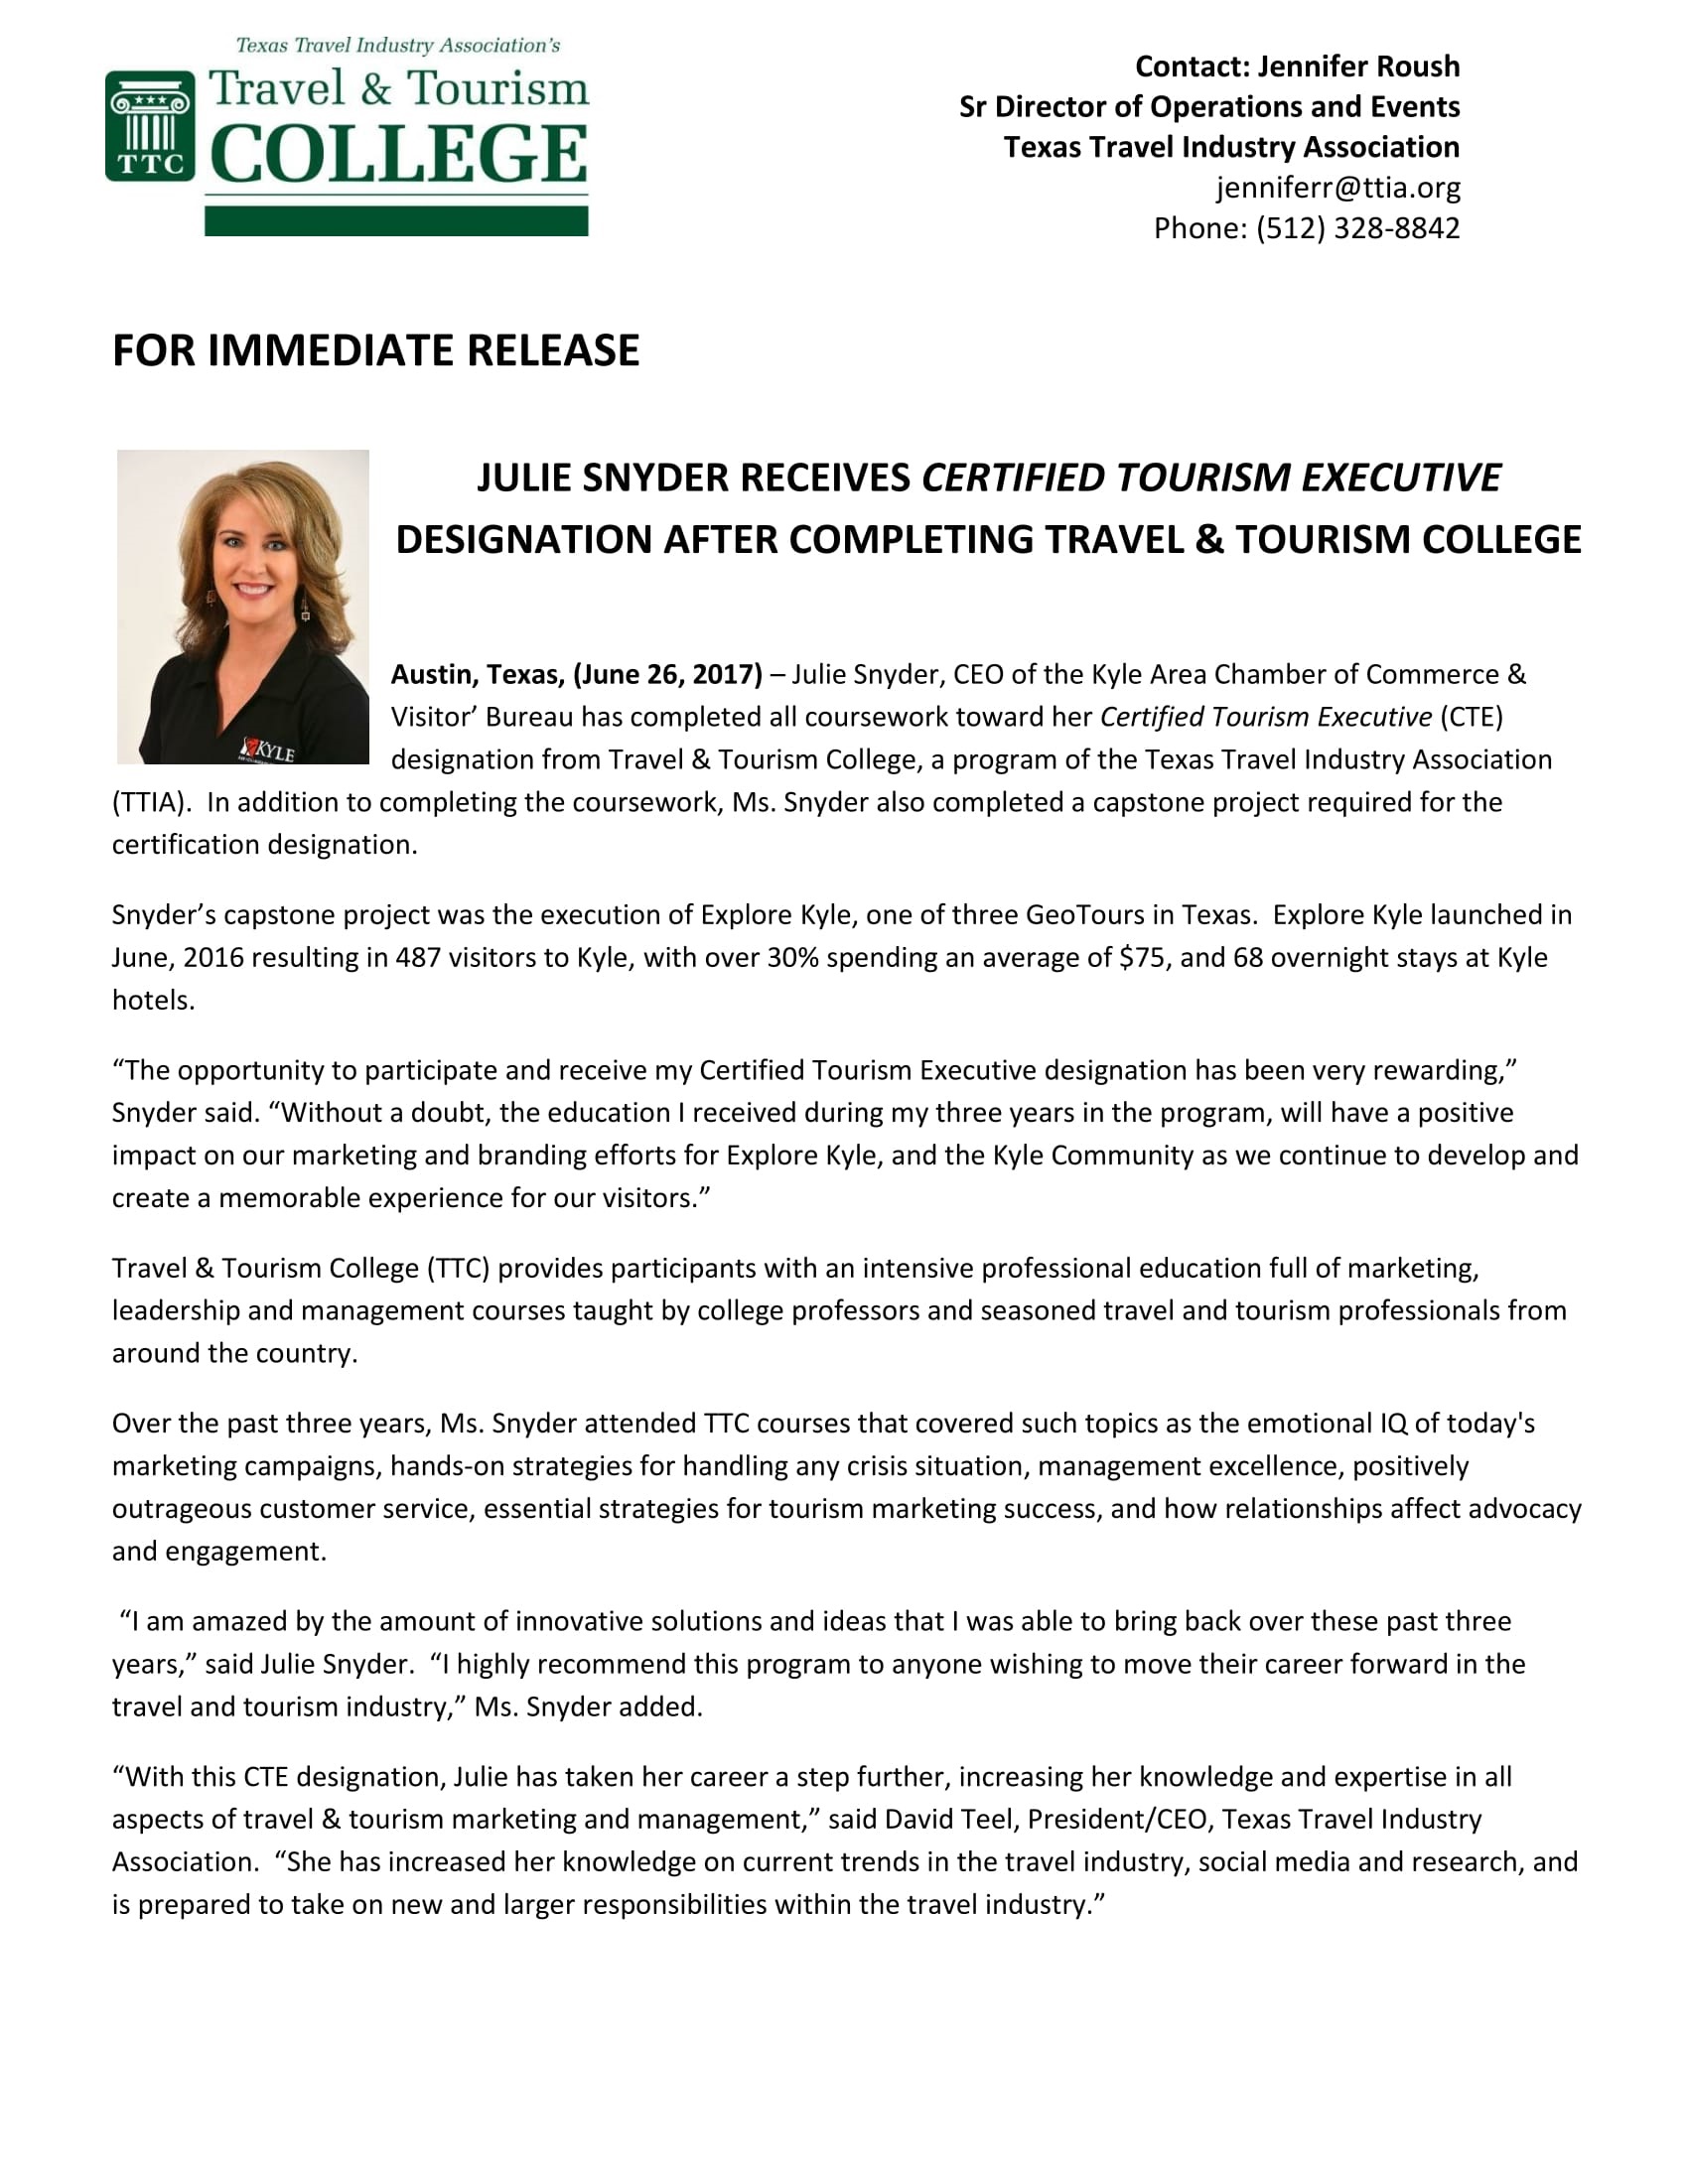 Image for Julie Snyder Receives Certified Tourism Executive Designation After Completing Travel and Tourism College